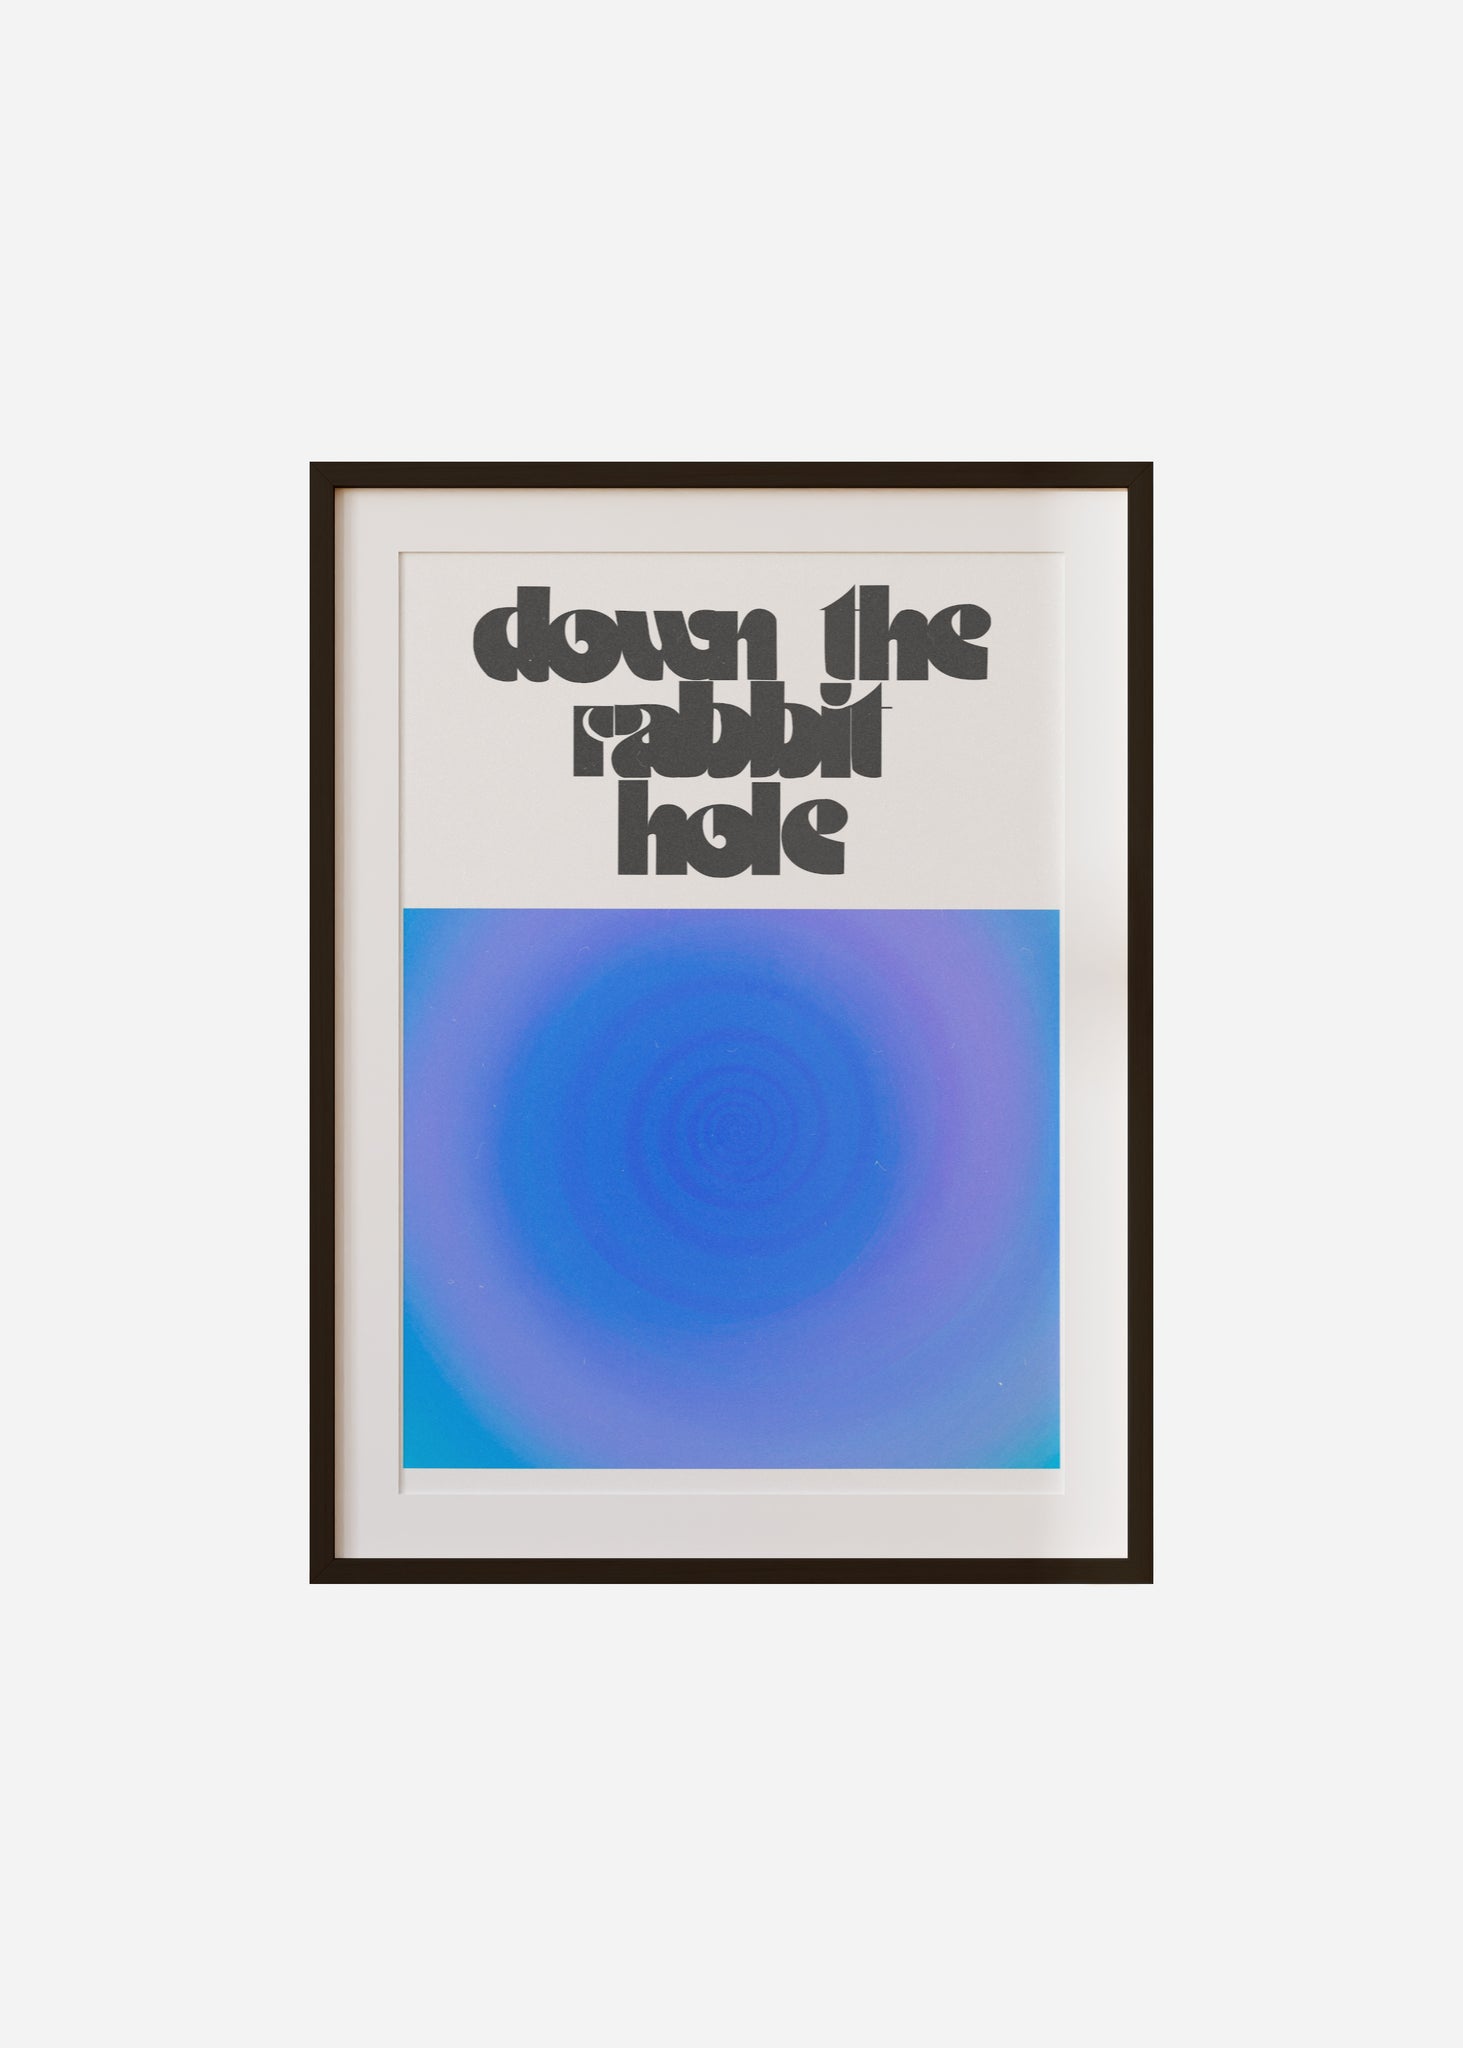 down the rabbit hole Framed & Mounted Print